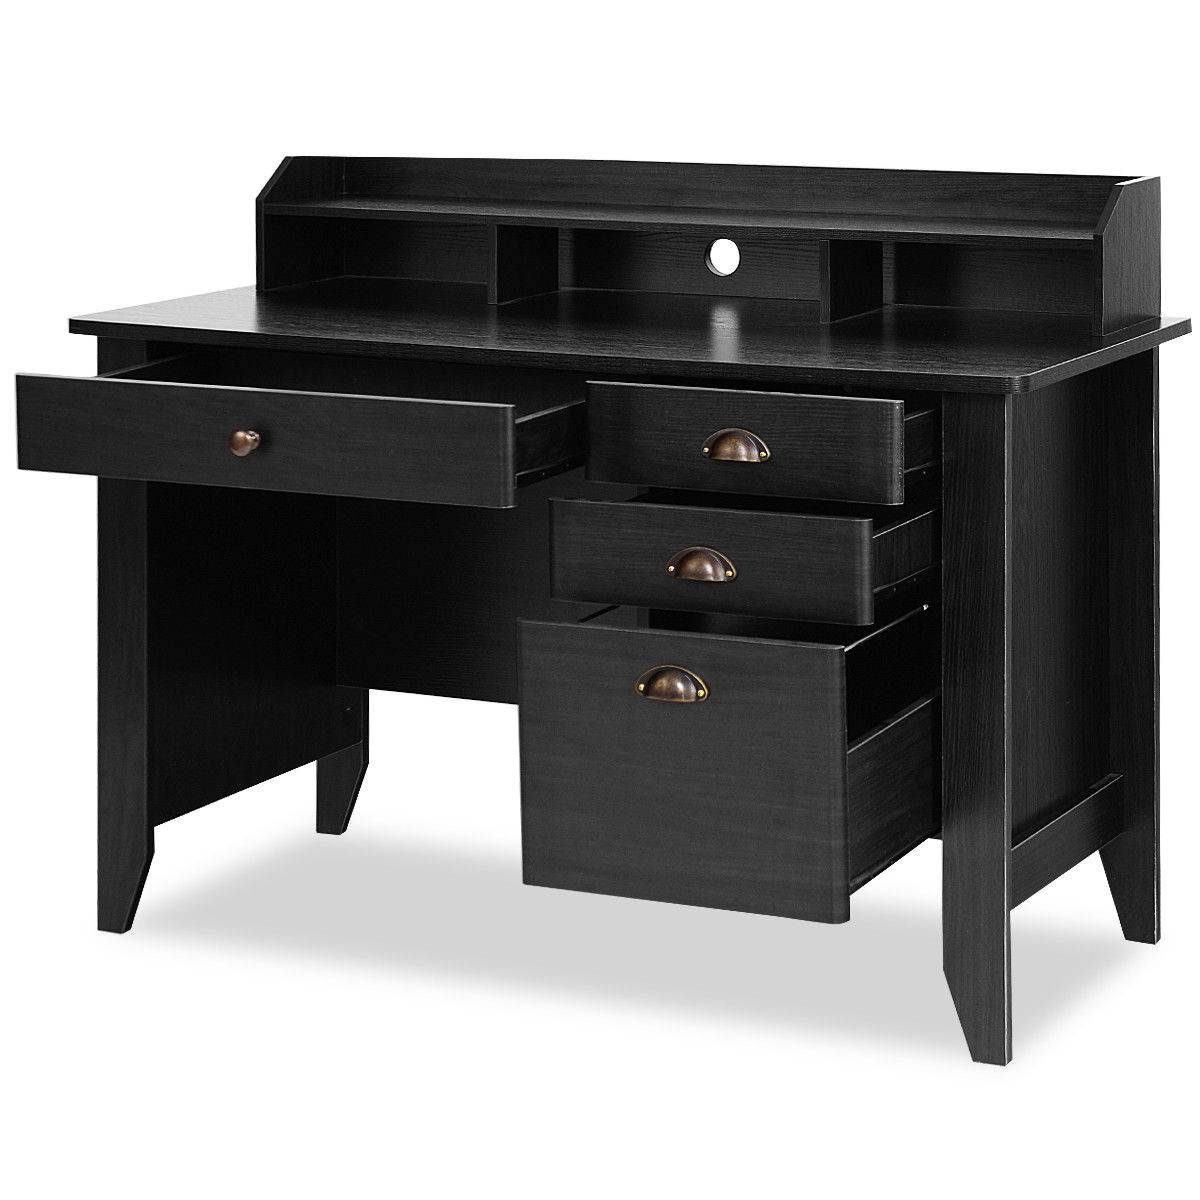 Modern Solid Wood Computer Desks Office Table with PC Droller Storage Shelves and File Cabinet Small Study Writing Desk - Black